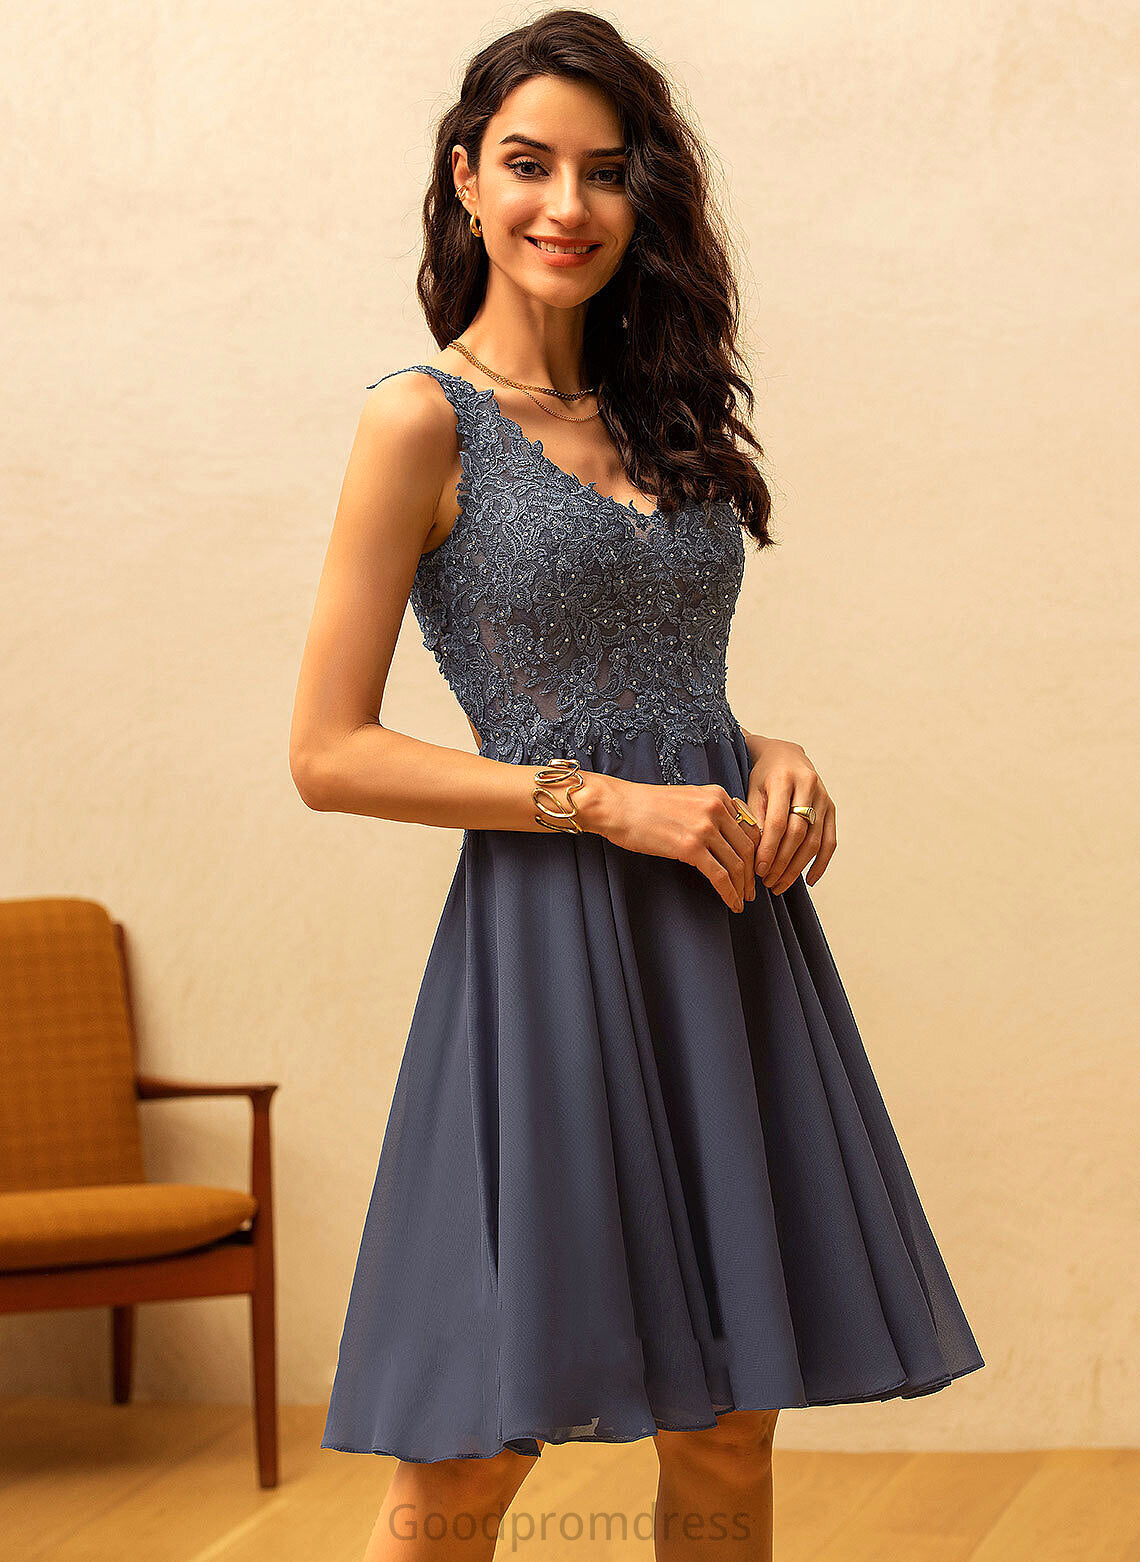 Homecoming Dresses Beading V-neck Homecoming With A-Line Lace Chiffon Dress Lexi Knee-Length